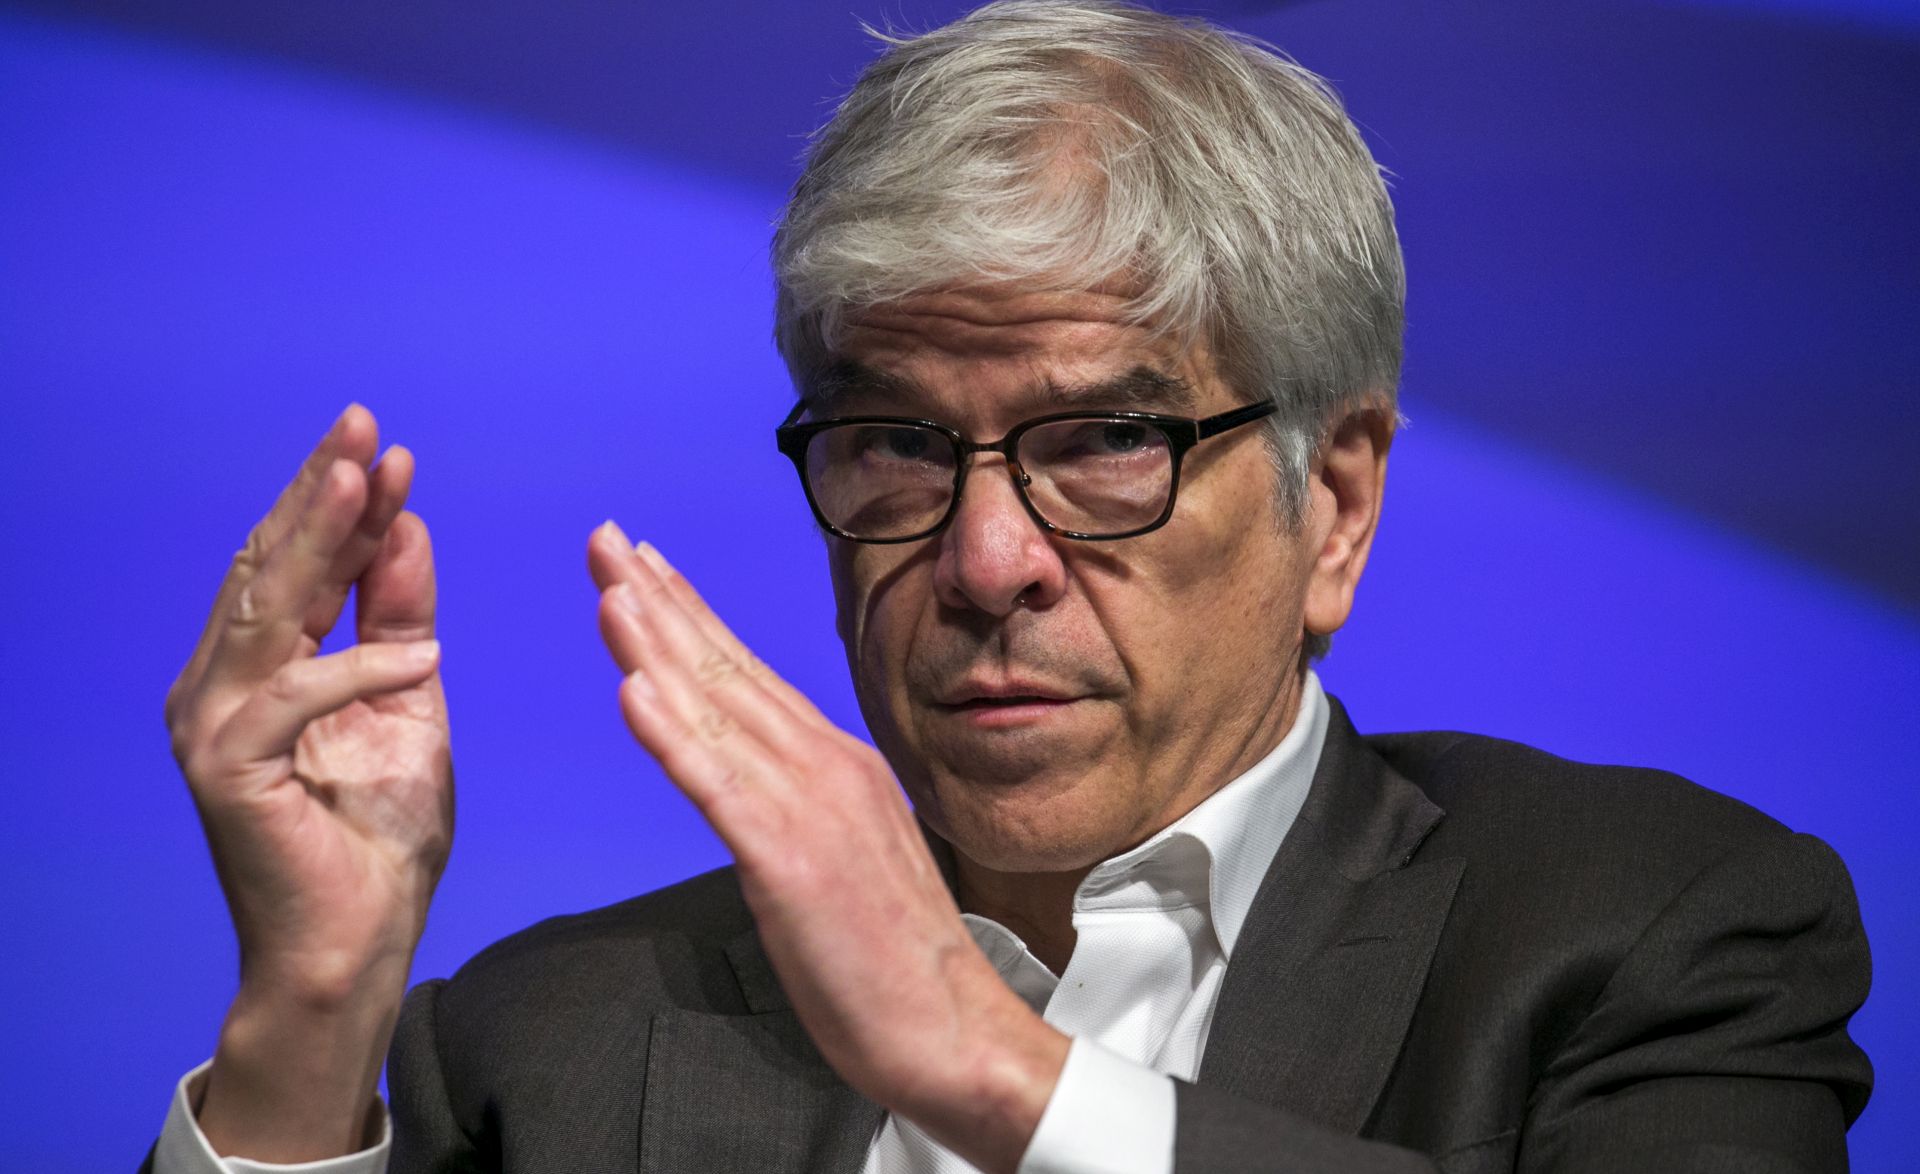 epa07078418 (FILE) - A file photo showing World Bank Chief Economist Paul Romer participating in a conversation at the World Bank Headquarters in Washington, DC, USA, 05 October 2016 (reissued 08 October 2018). The Nobel committee on 08 October 2018 announced the Nobel Prize in Economic Sciences has been awarded to William D.Nordhaus of Yale University, New Haven, USA and Paul M. Romer of NYU Stern School of Business, New York, USA.  EPA/SHAWN THEW